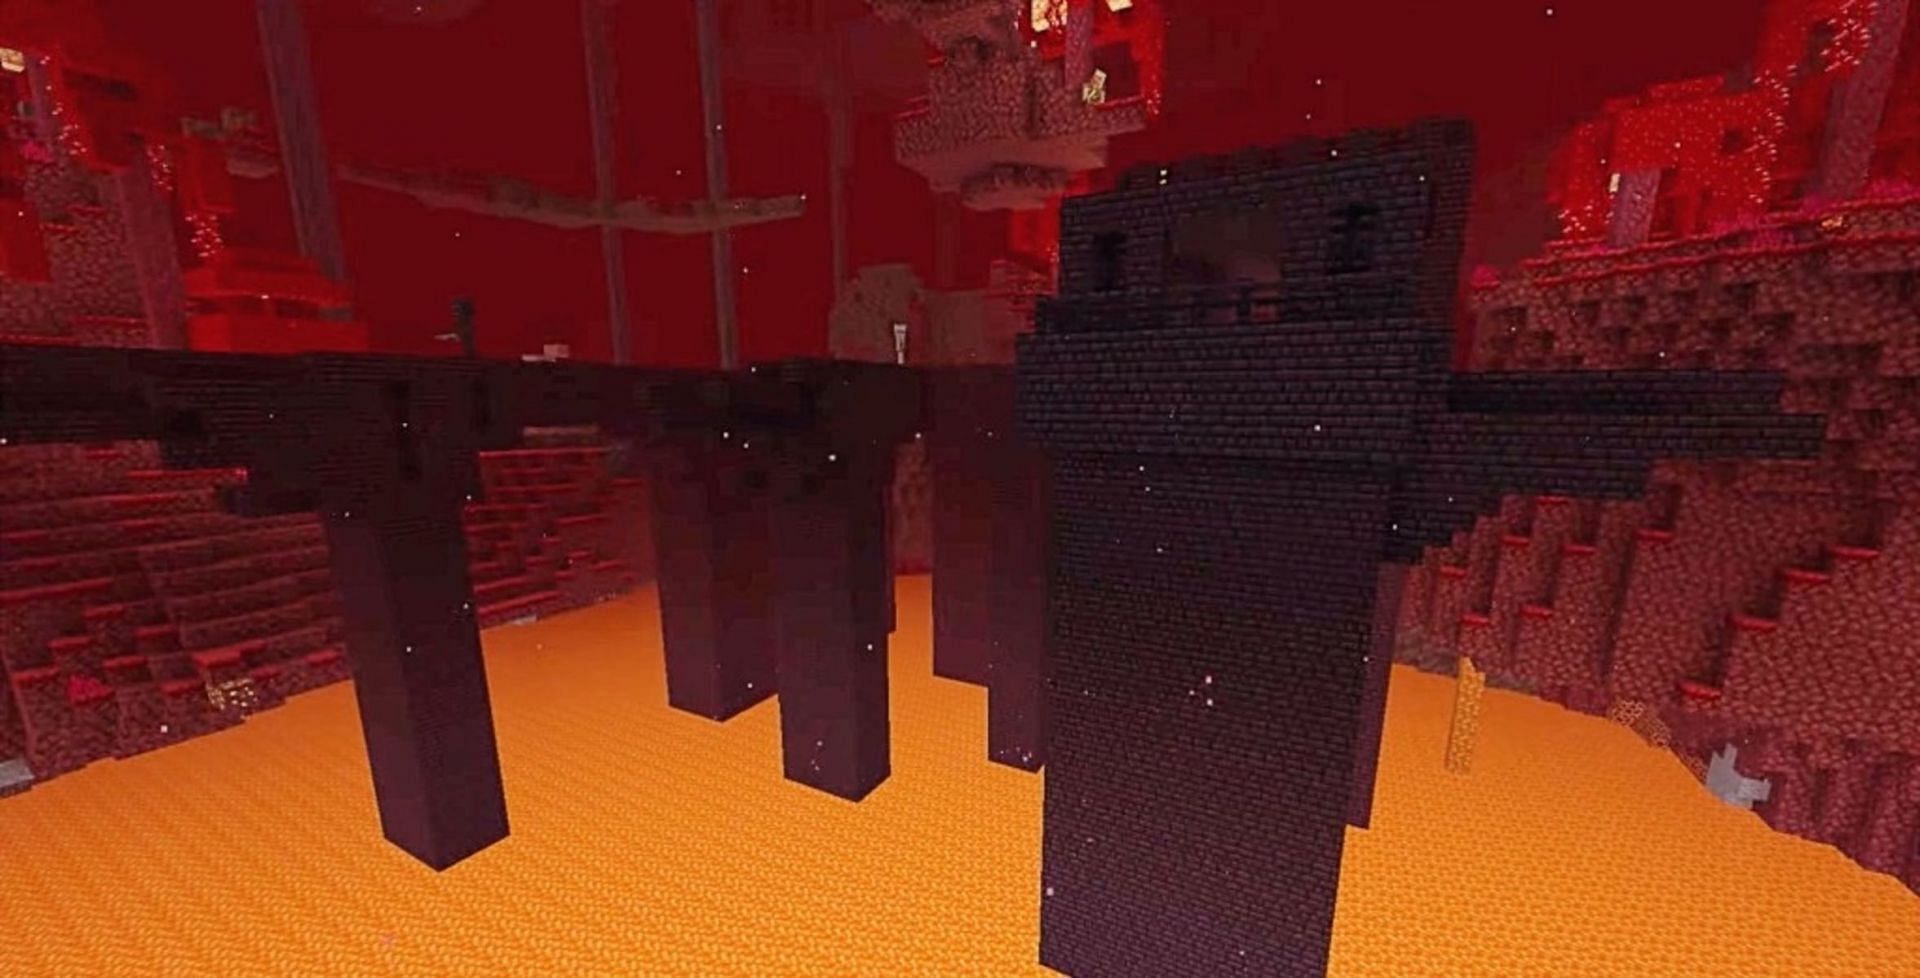 A nether fortress featuring a wither skeleton patrolling its bridge (Image via Mojang)